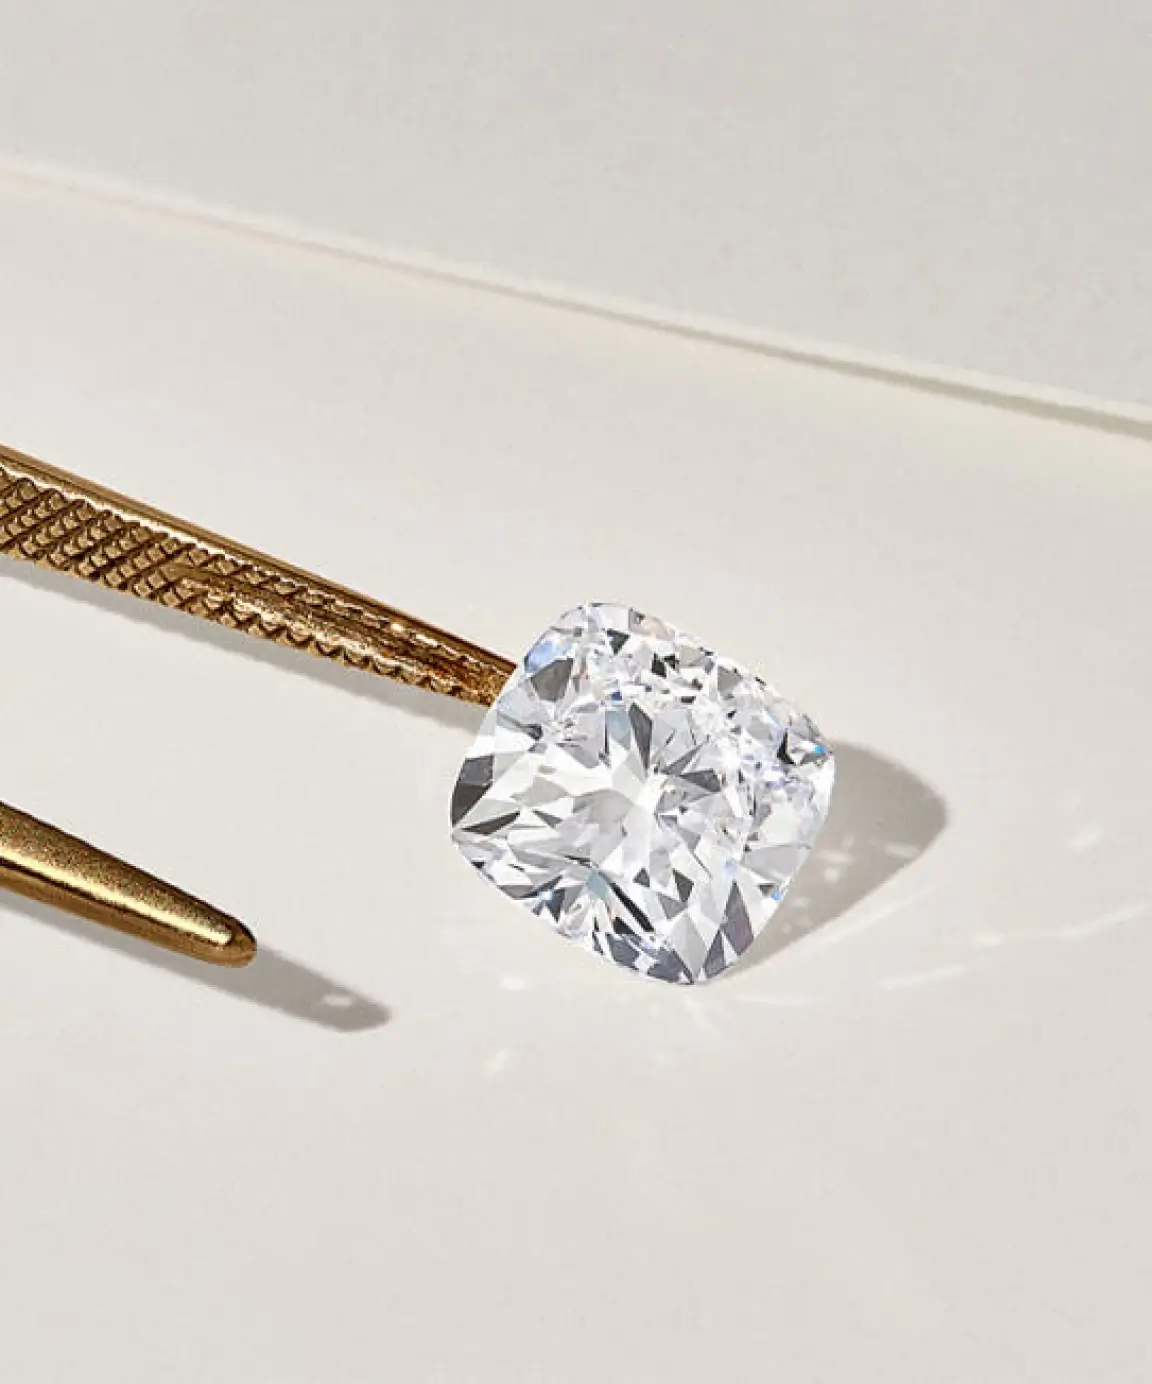 Lab Grown Diamonds: A Better Investment